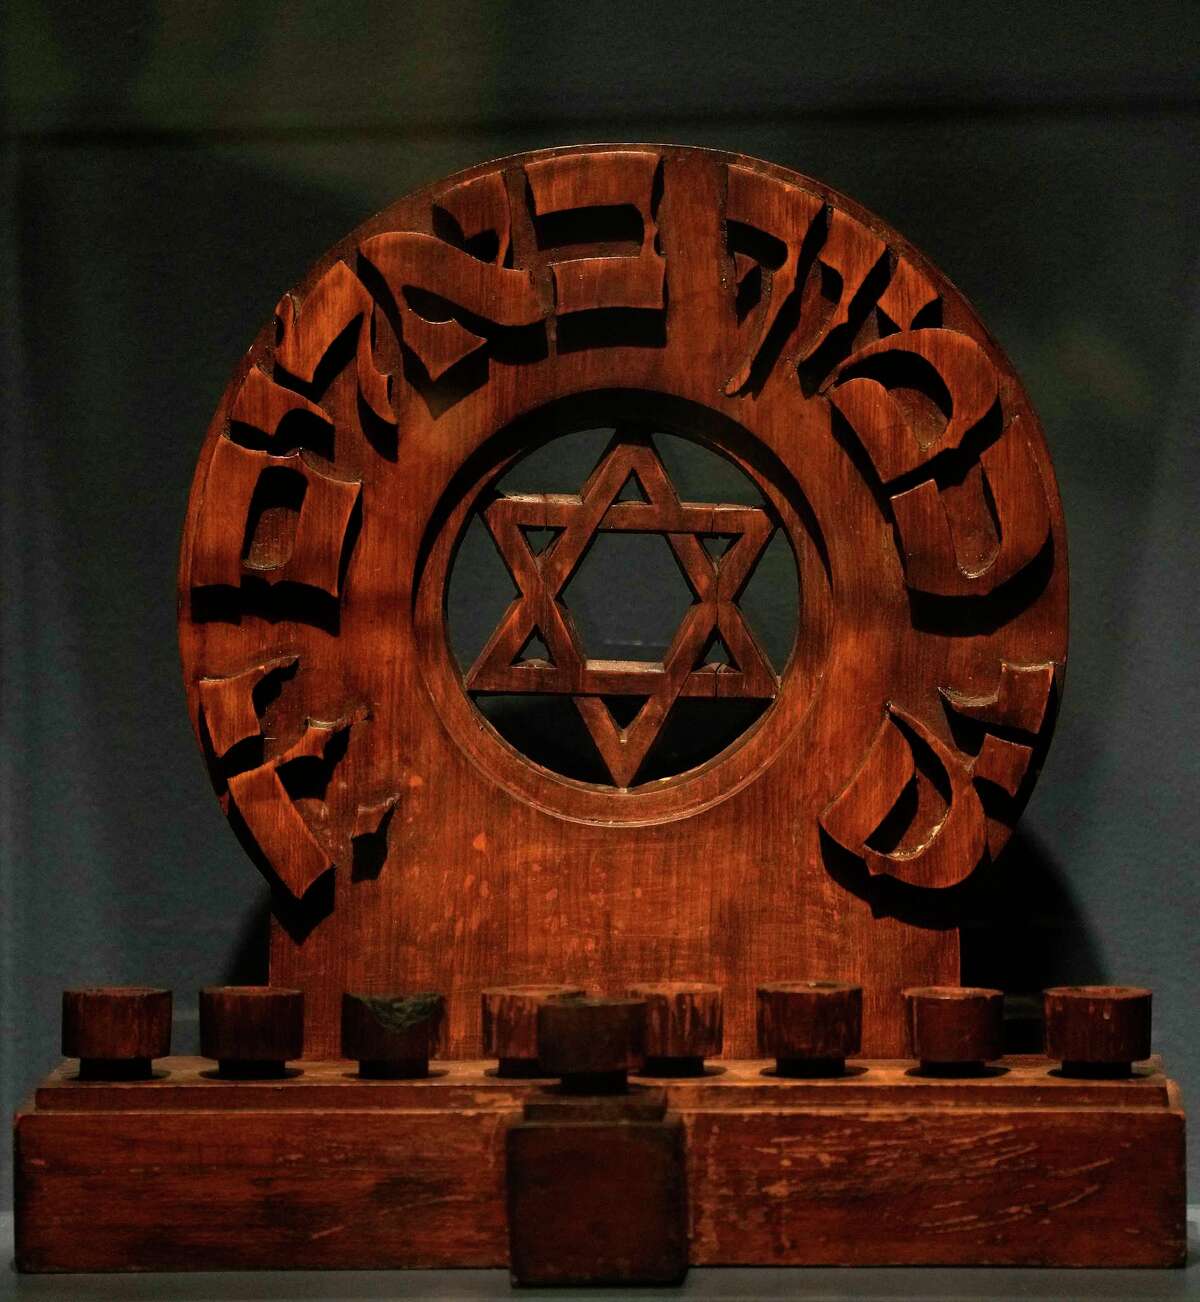 A Hanukkah lamp with the Hebrew inscription, “Who is like you, O Lord, among the celestials?” that was created during the Holocaust is on exhibit in the "Beauty and Ritual: Judaica" at the Museum of Fine Arts, Houston.